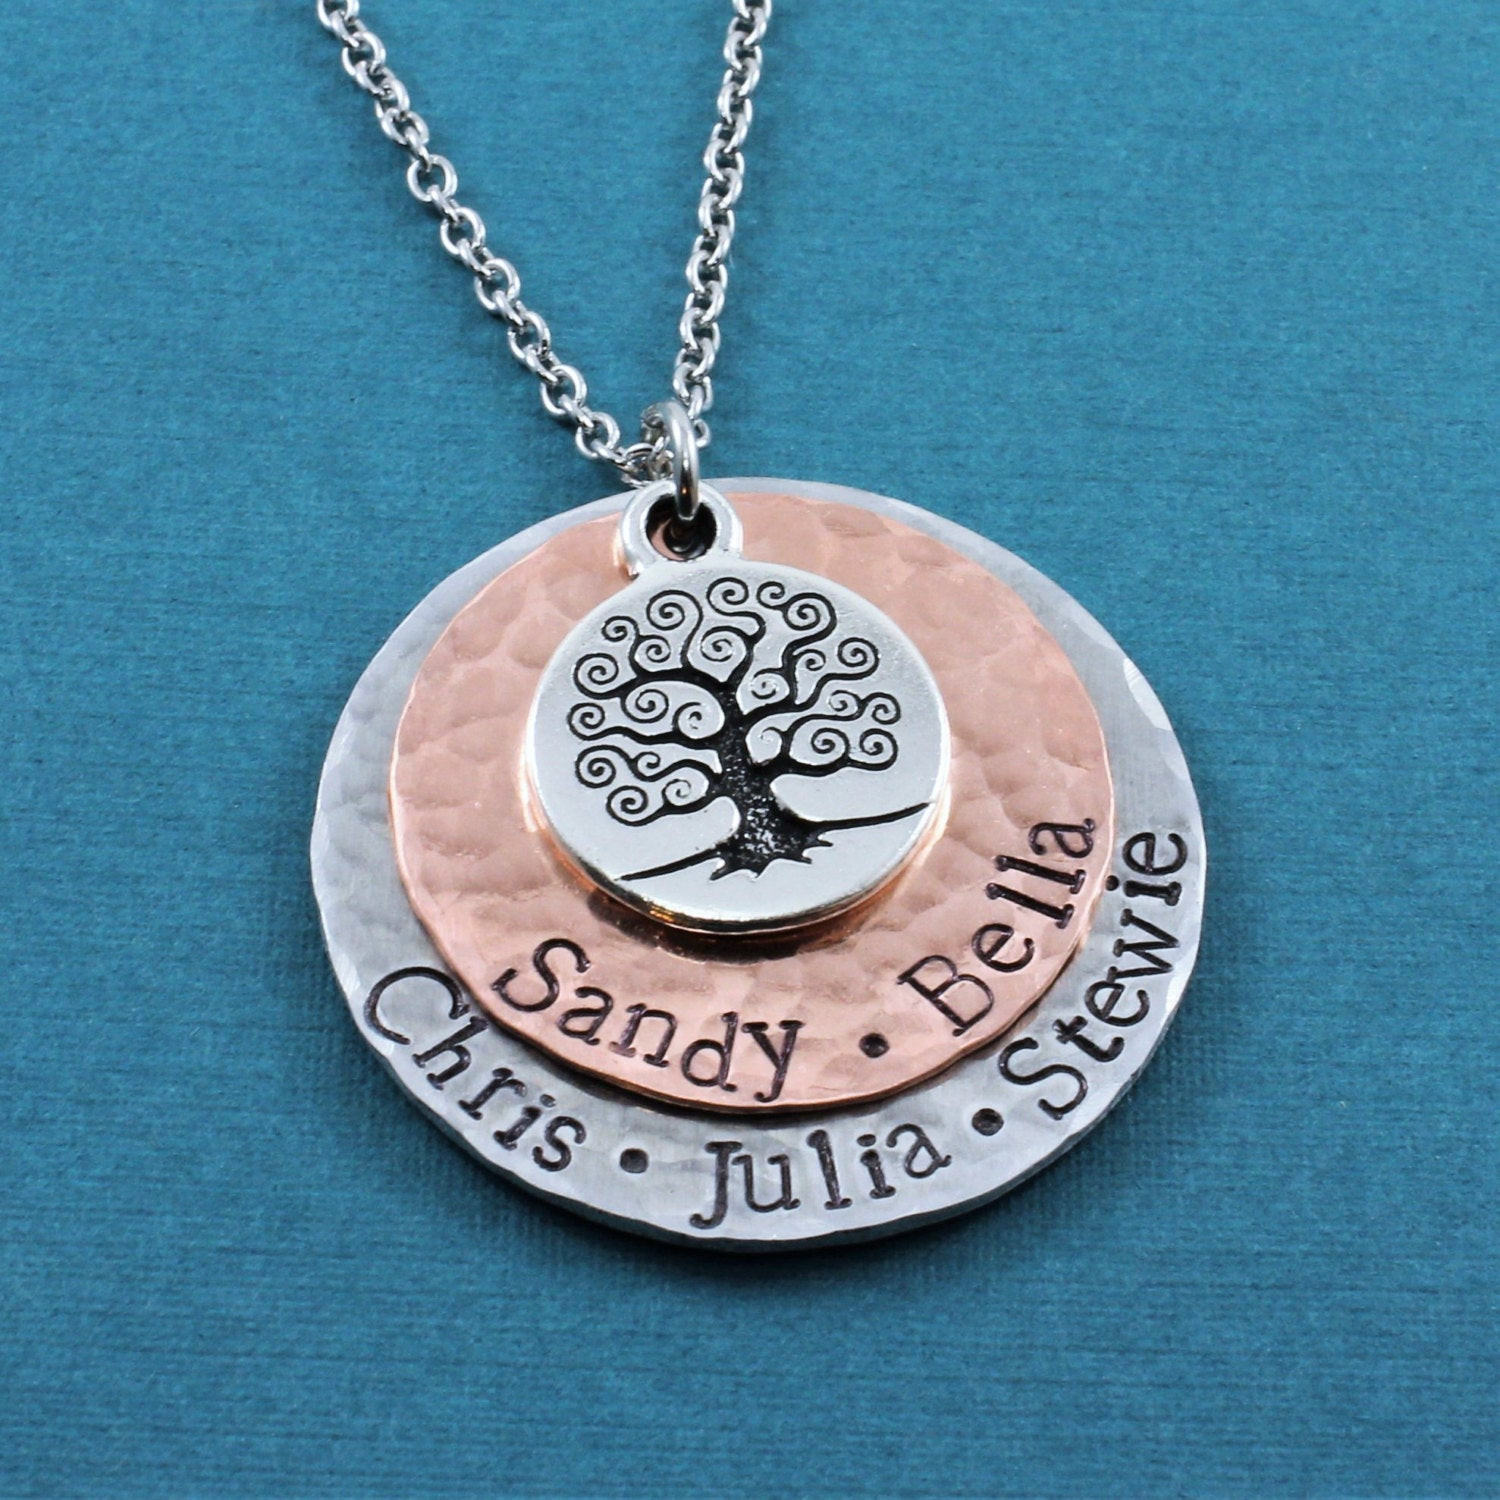 Family Tree Necklace
 Personalized Necklace Hand Stamped Family Tree Necklace